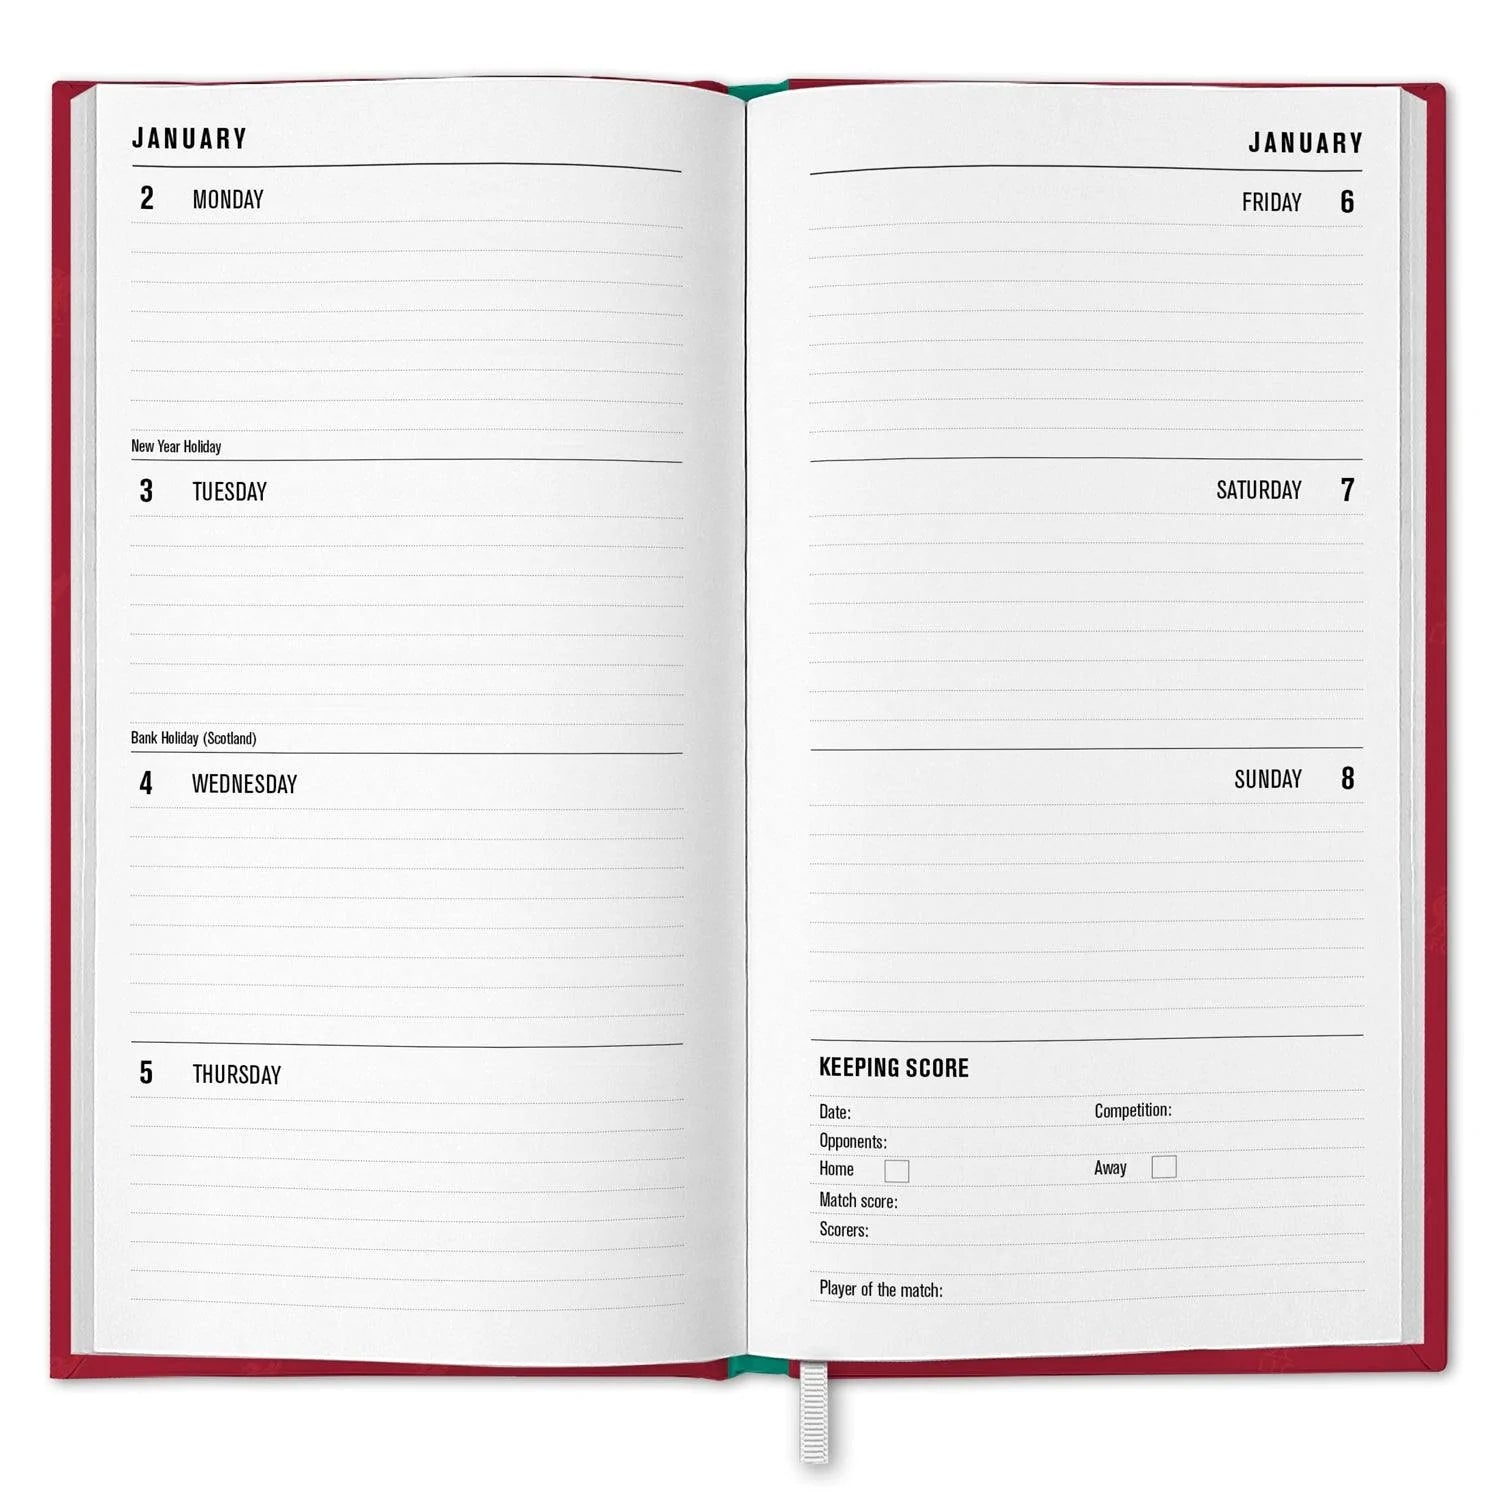 2023 Liverpool FC  - Weekly Pocket Diary/Planner